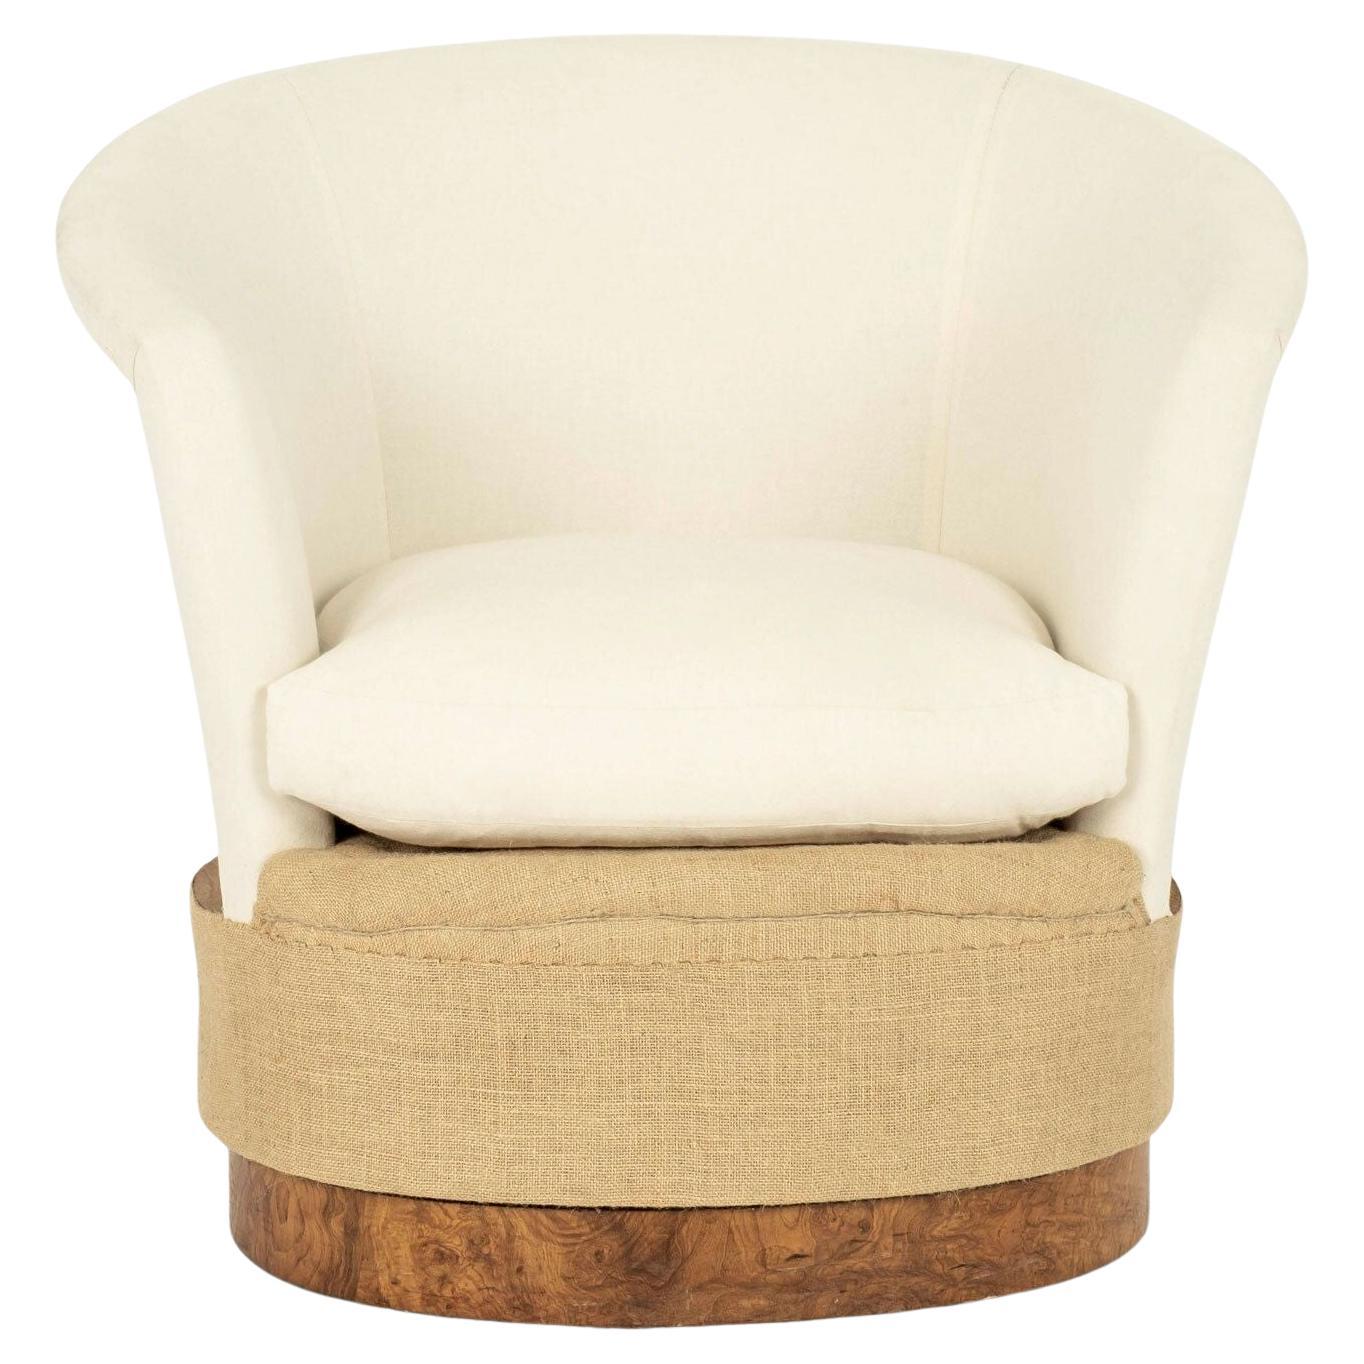 English Art Deco tub chair: pine upholstered in cotton and burlap. Circa 1925-1935.